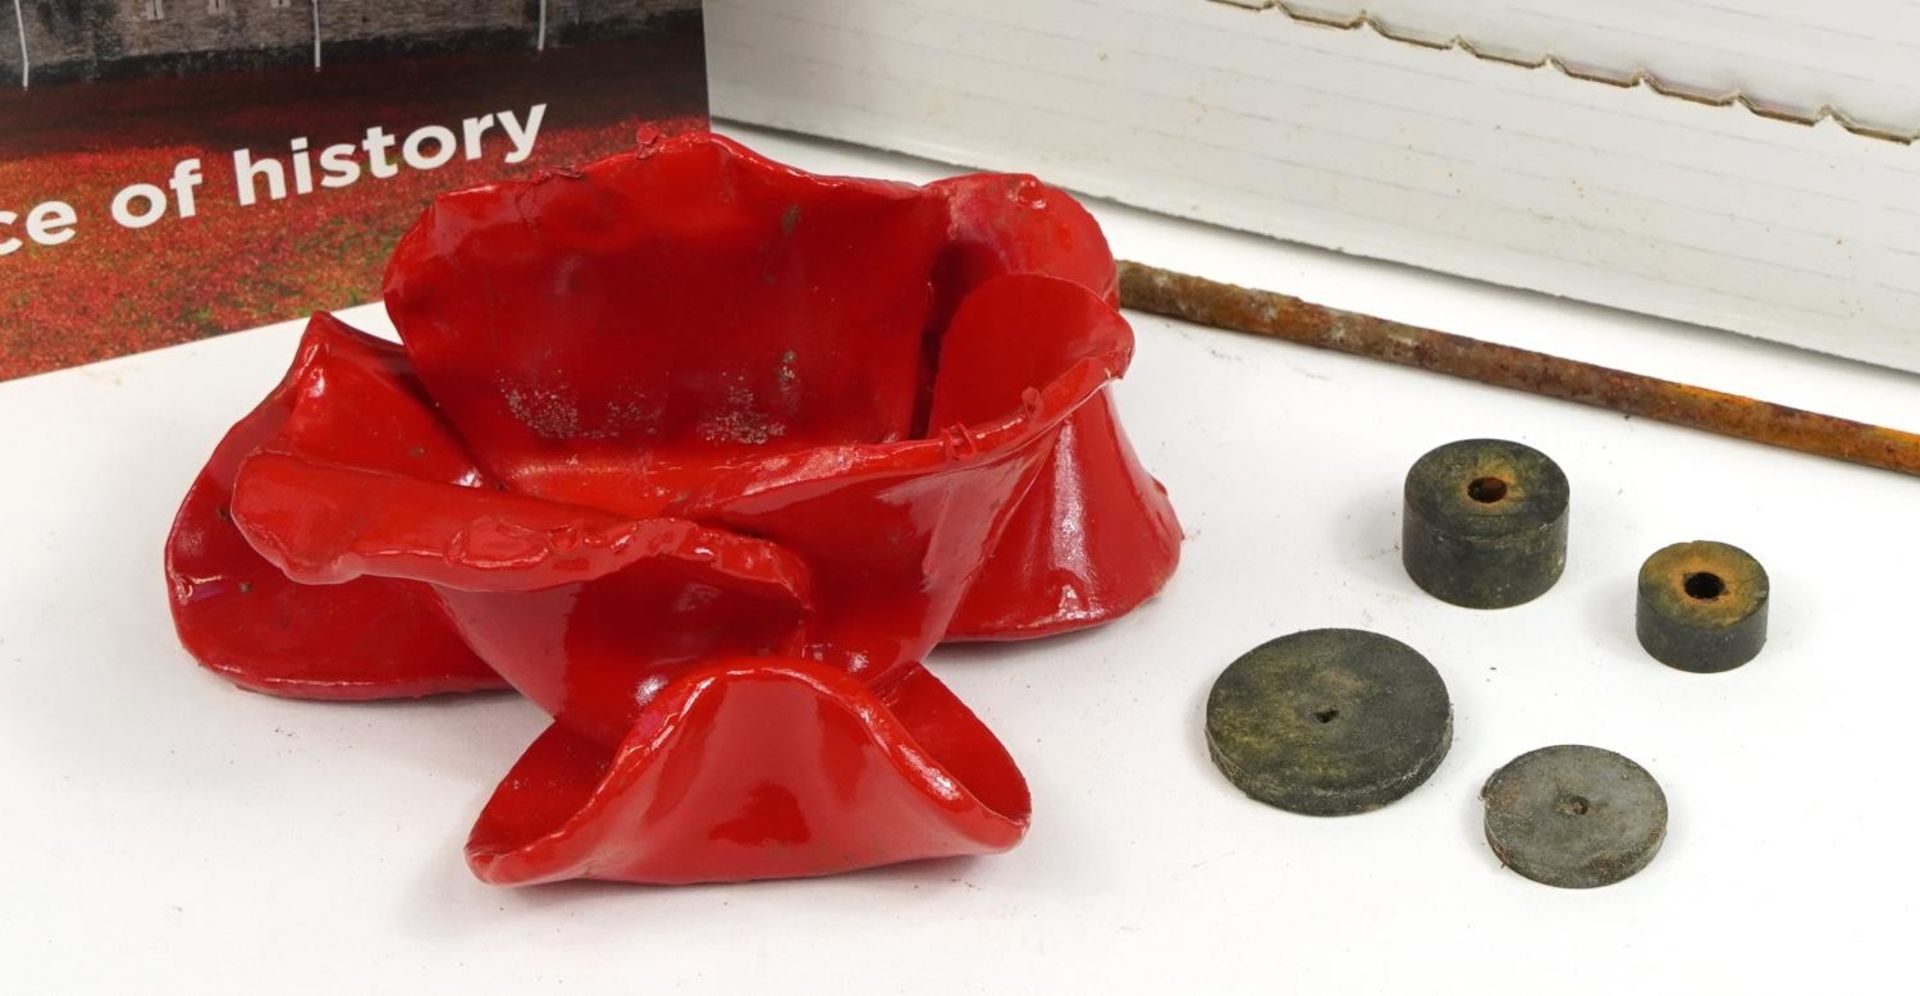 Paul Cummins ceramic poppy made for the art installation Blood, Sweat, Lands and Seas of Red at - Image 2 of 2